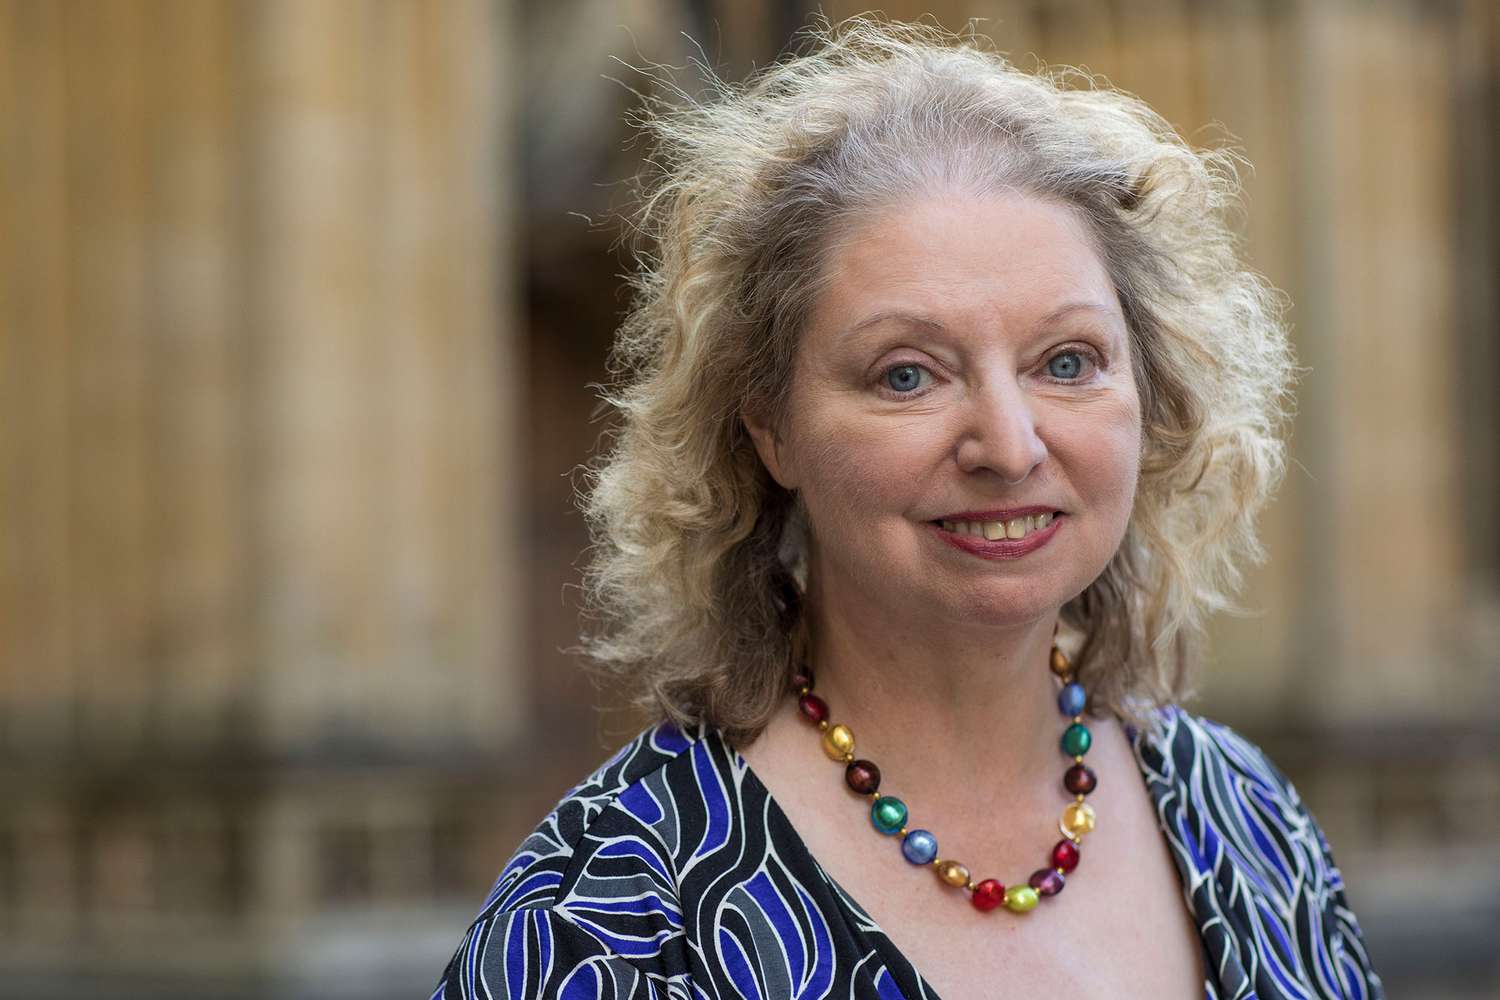 Dame Hilary Mantel, Booker Prize winning author, at the FT Weekend Oxford Literary Festival on April 1, 2017 in Oxford, England.